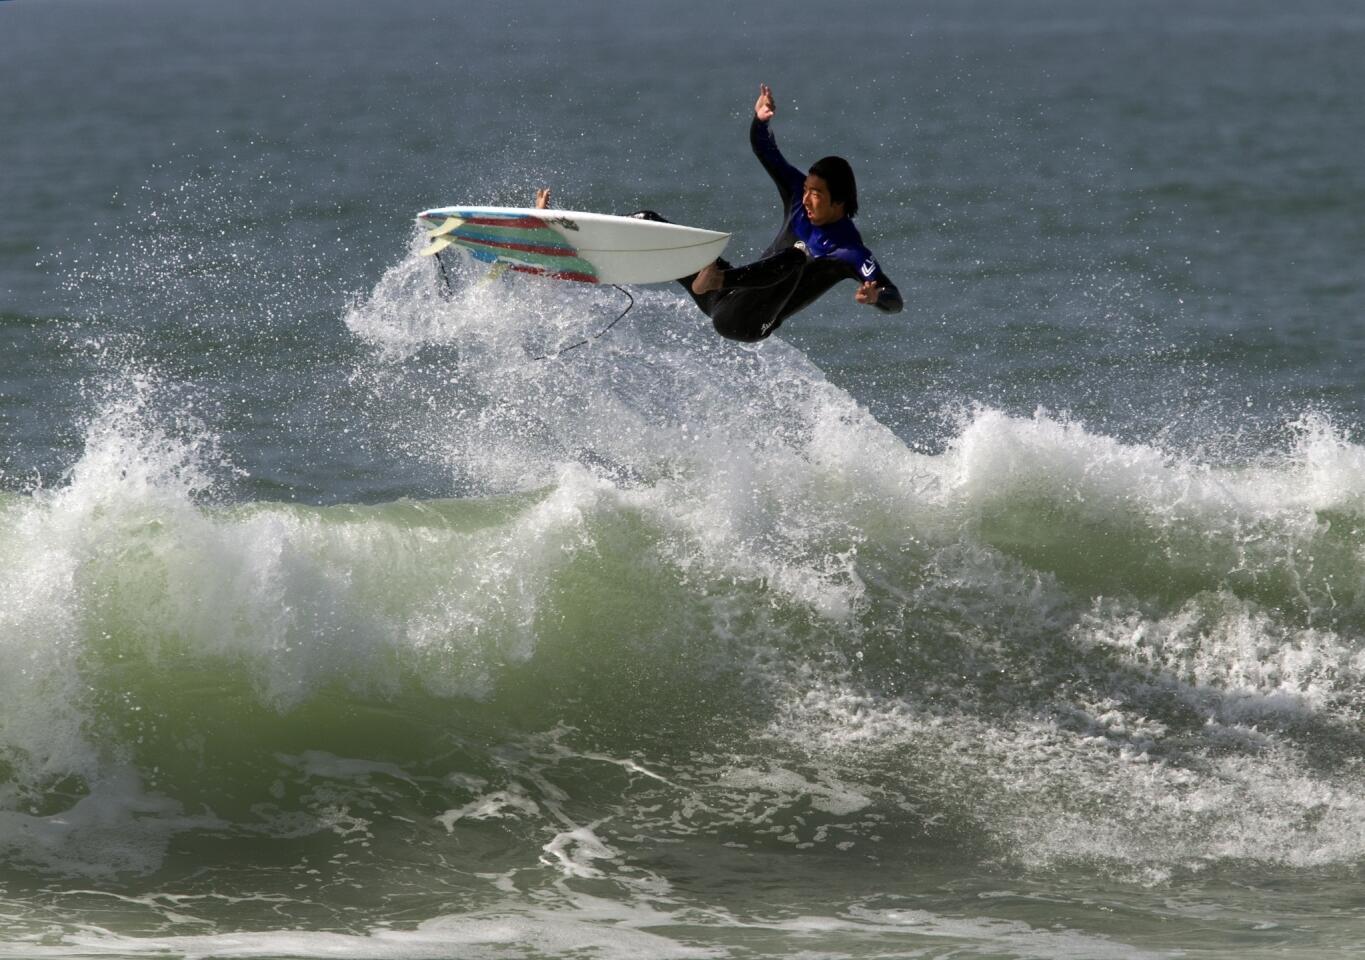 A surfer goes airborne high over a big wave at the Newport Beach jetties Wednesday.